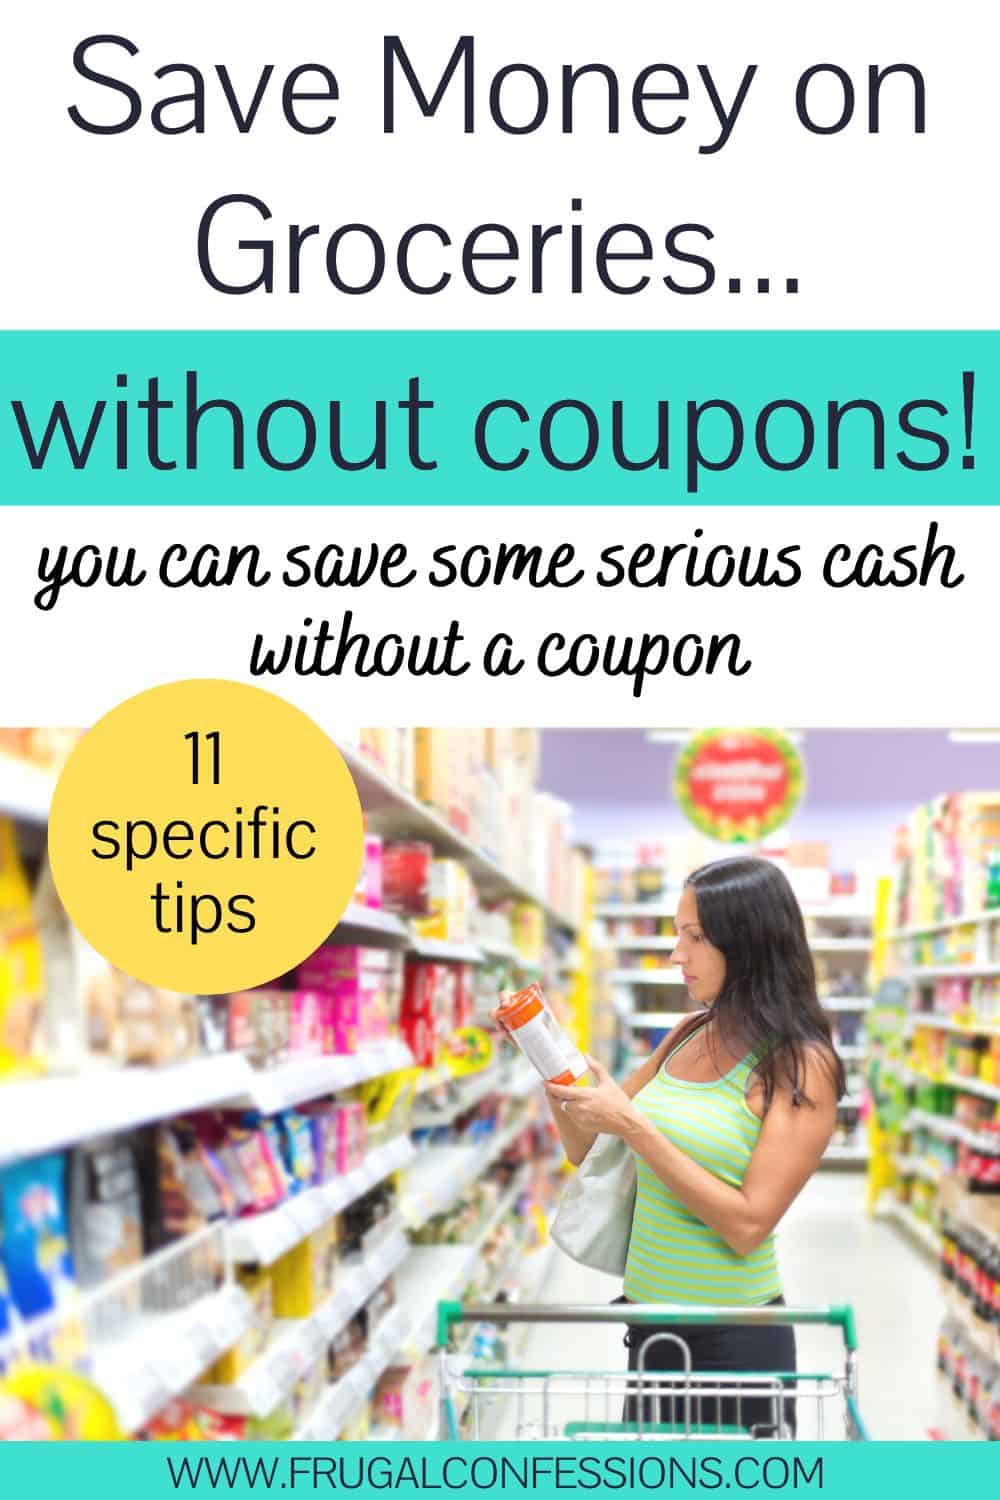 woman in green tank top reading product label in grocery aisle, text overlay "how to save money on groceries without coupons"